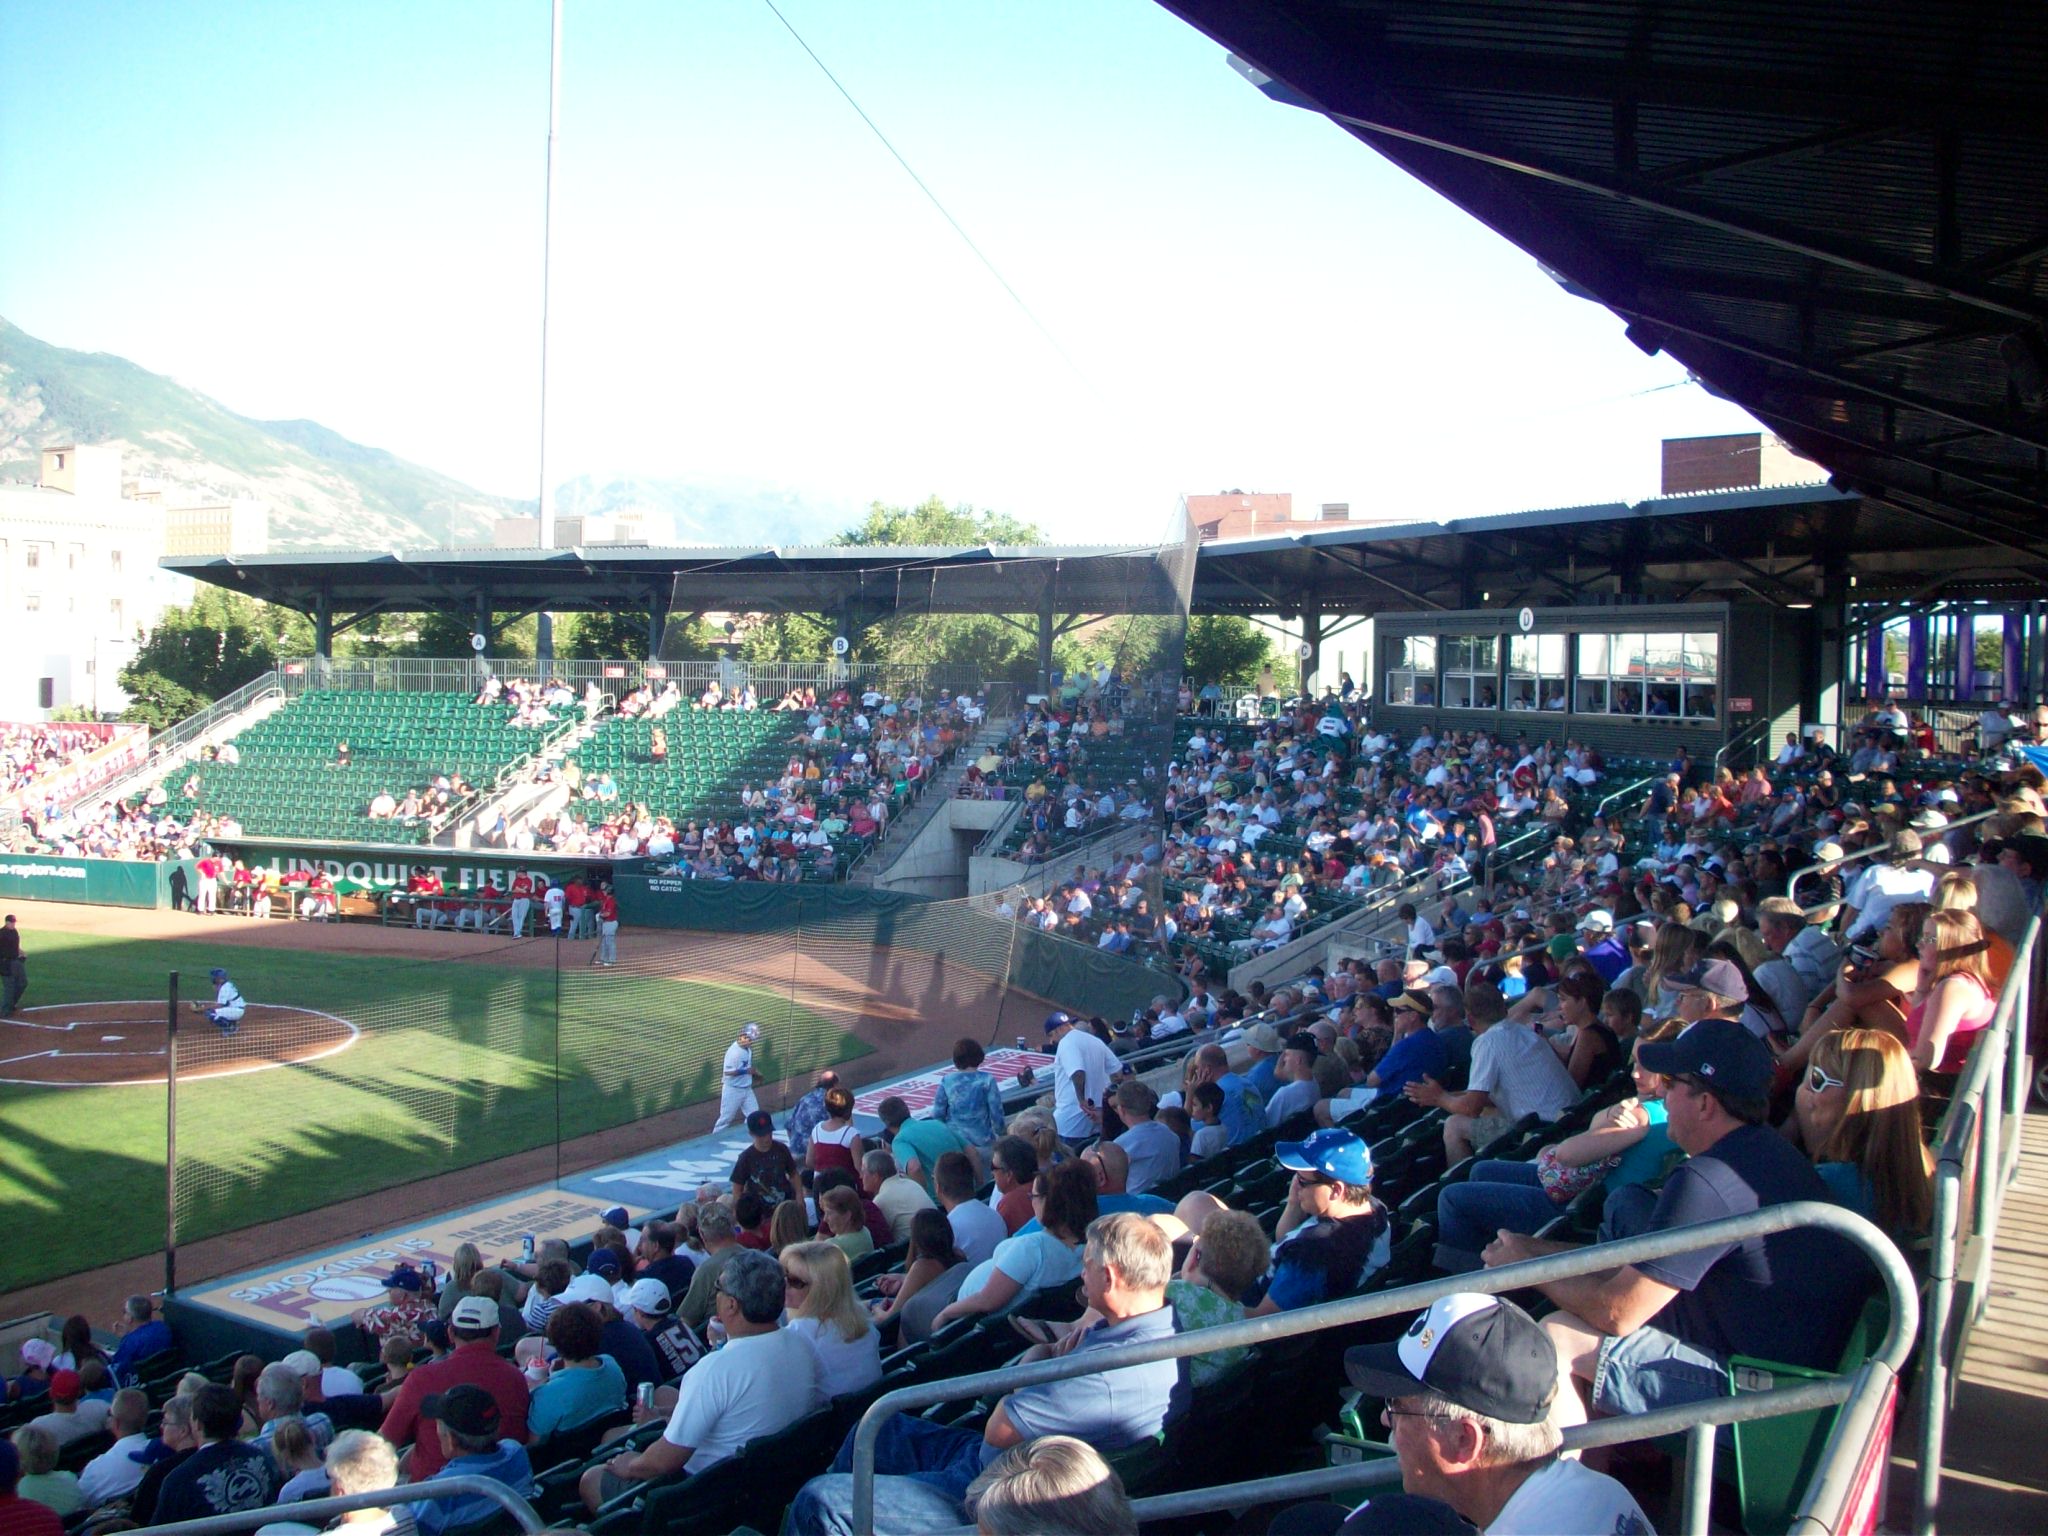 Lindquist Field Seating Chart